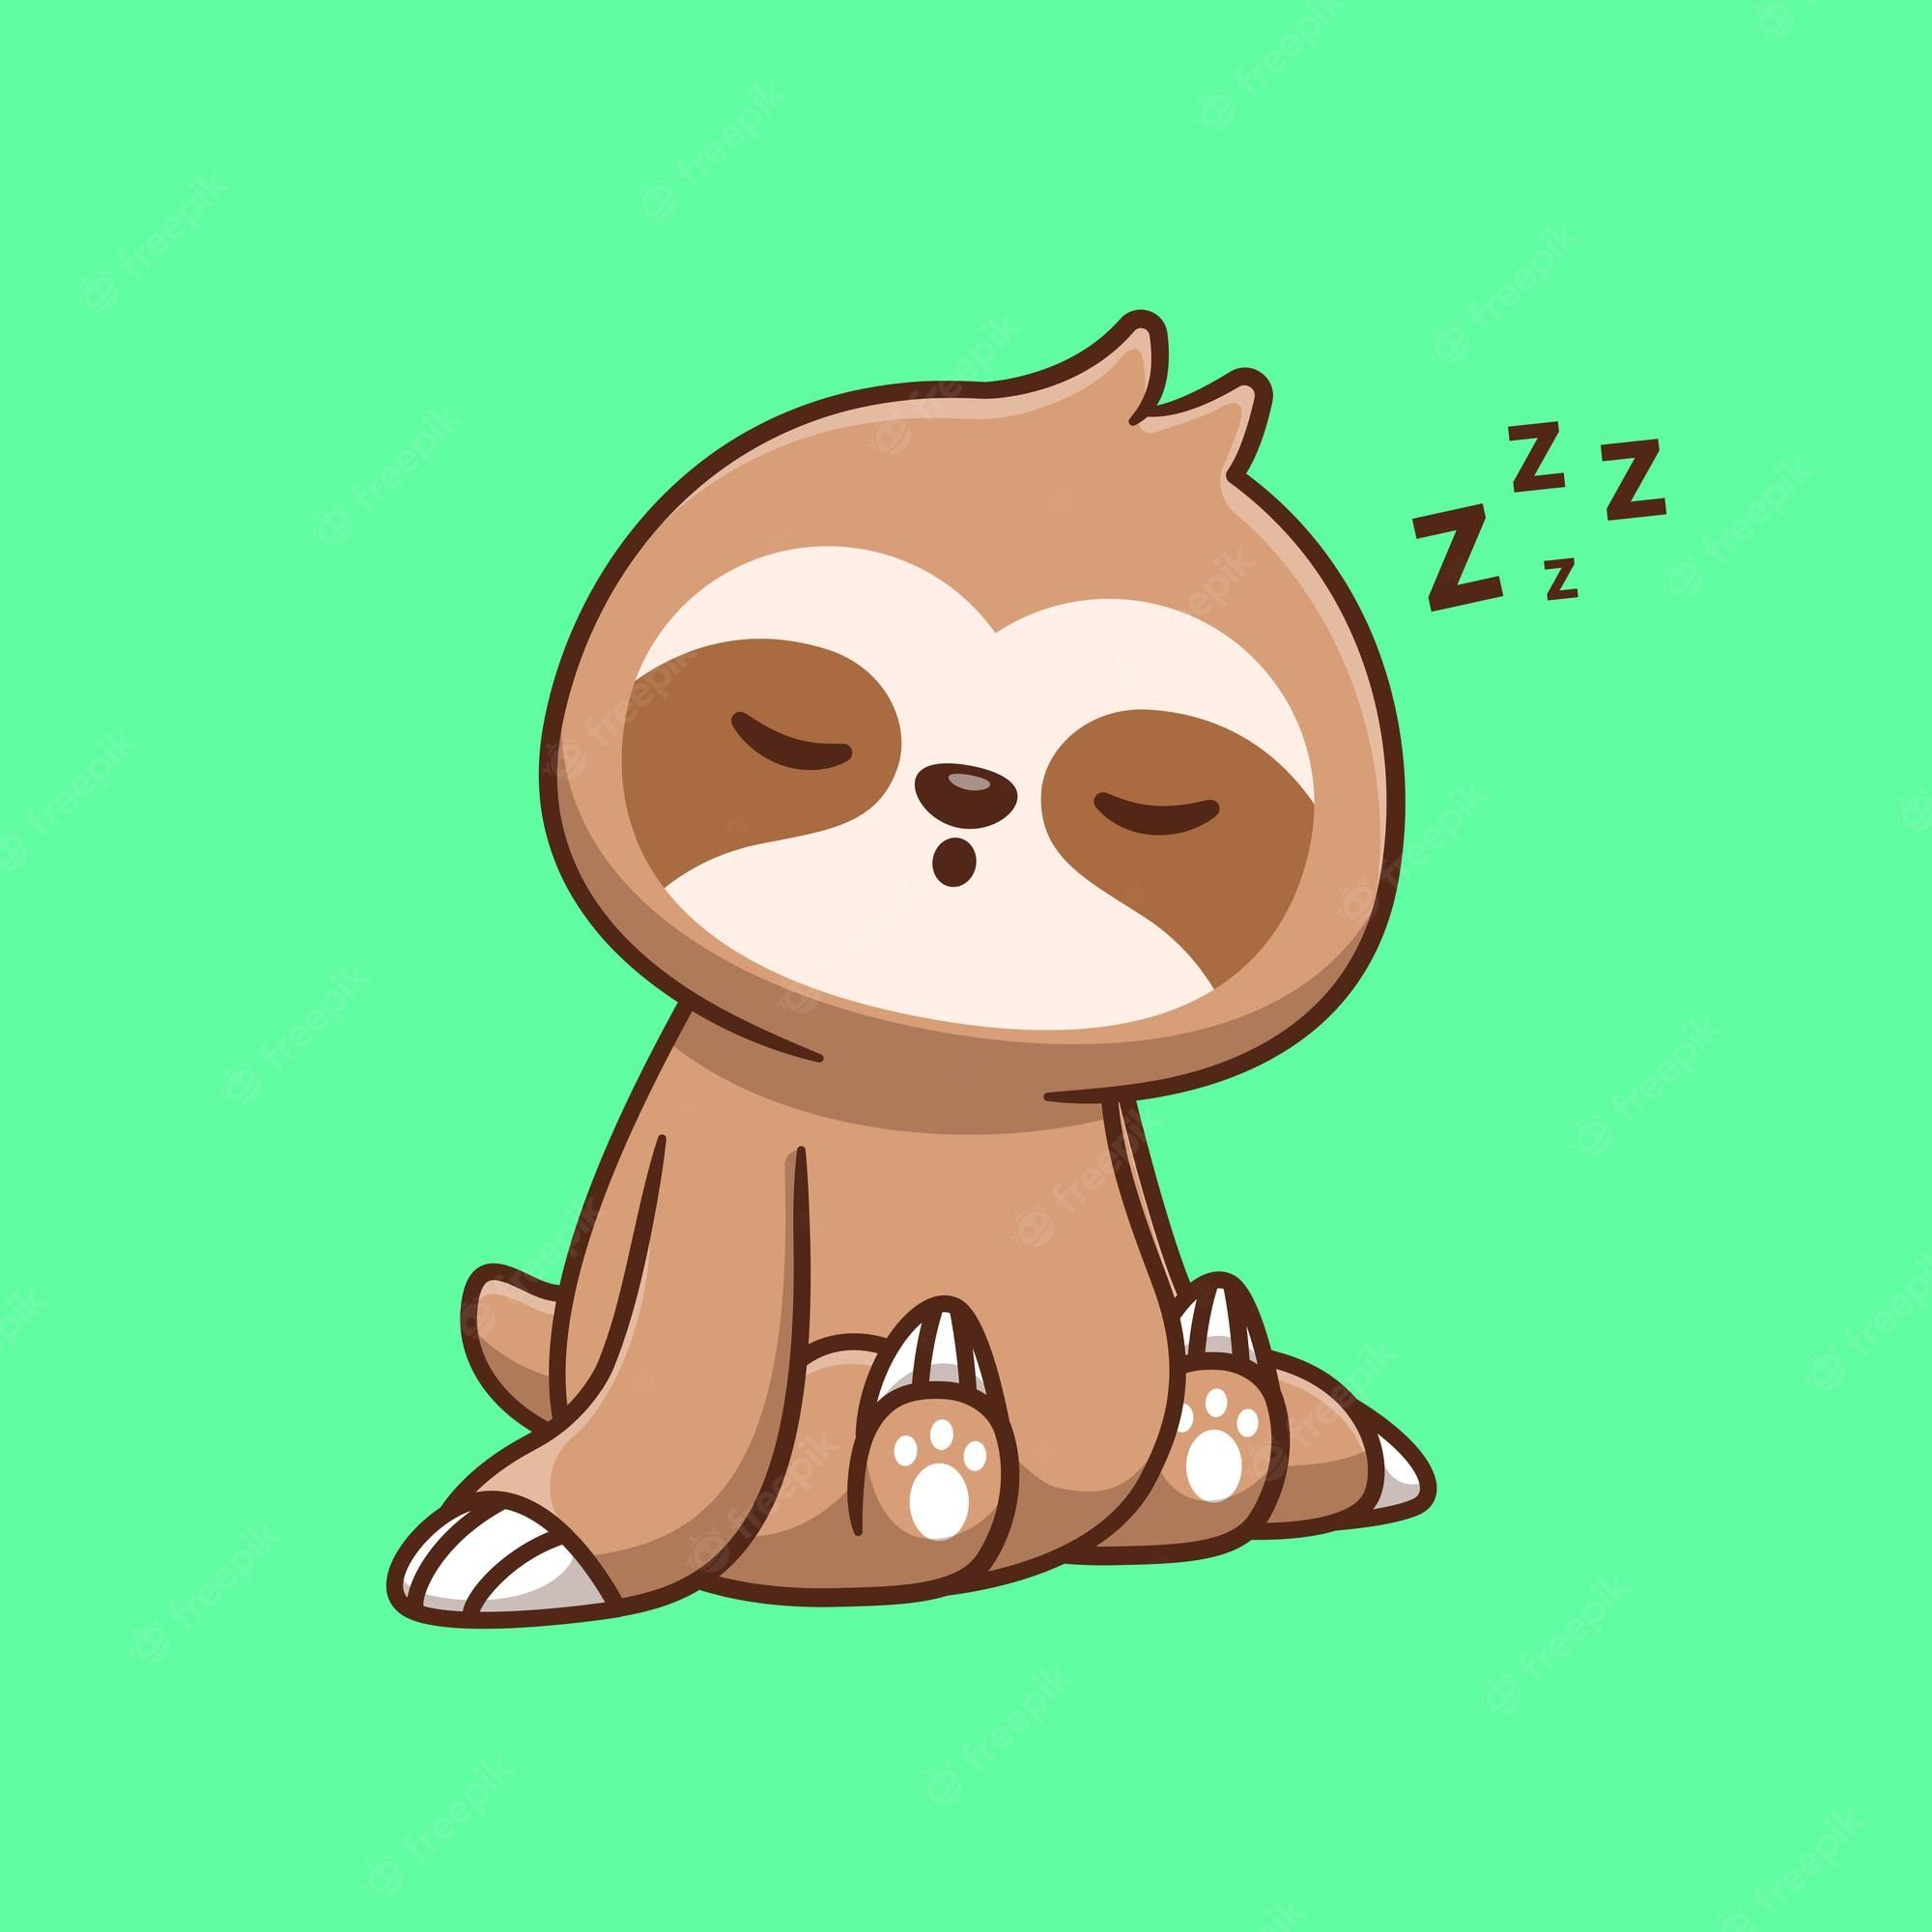 A cute sloth is sleeping on the green background - Sloth